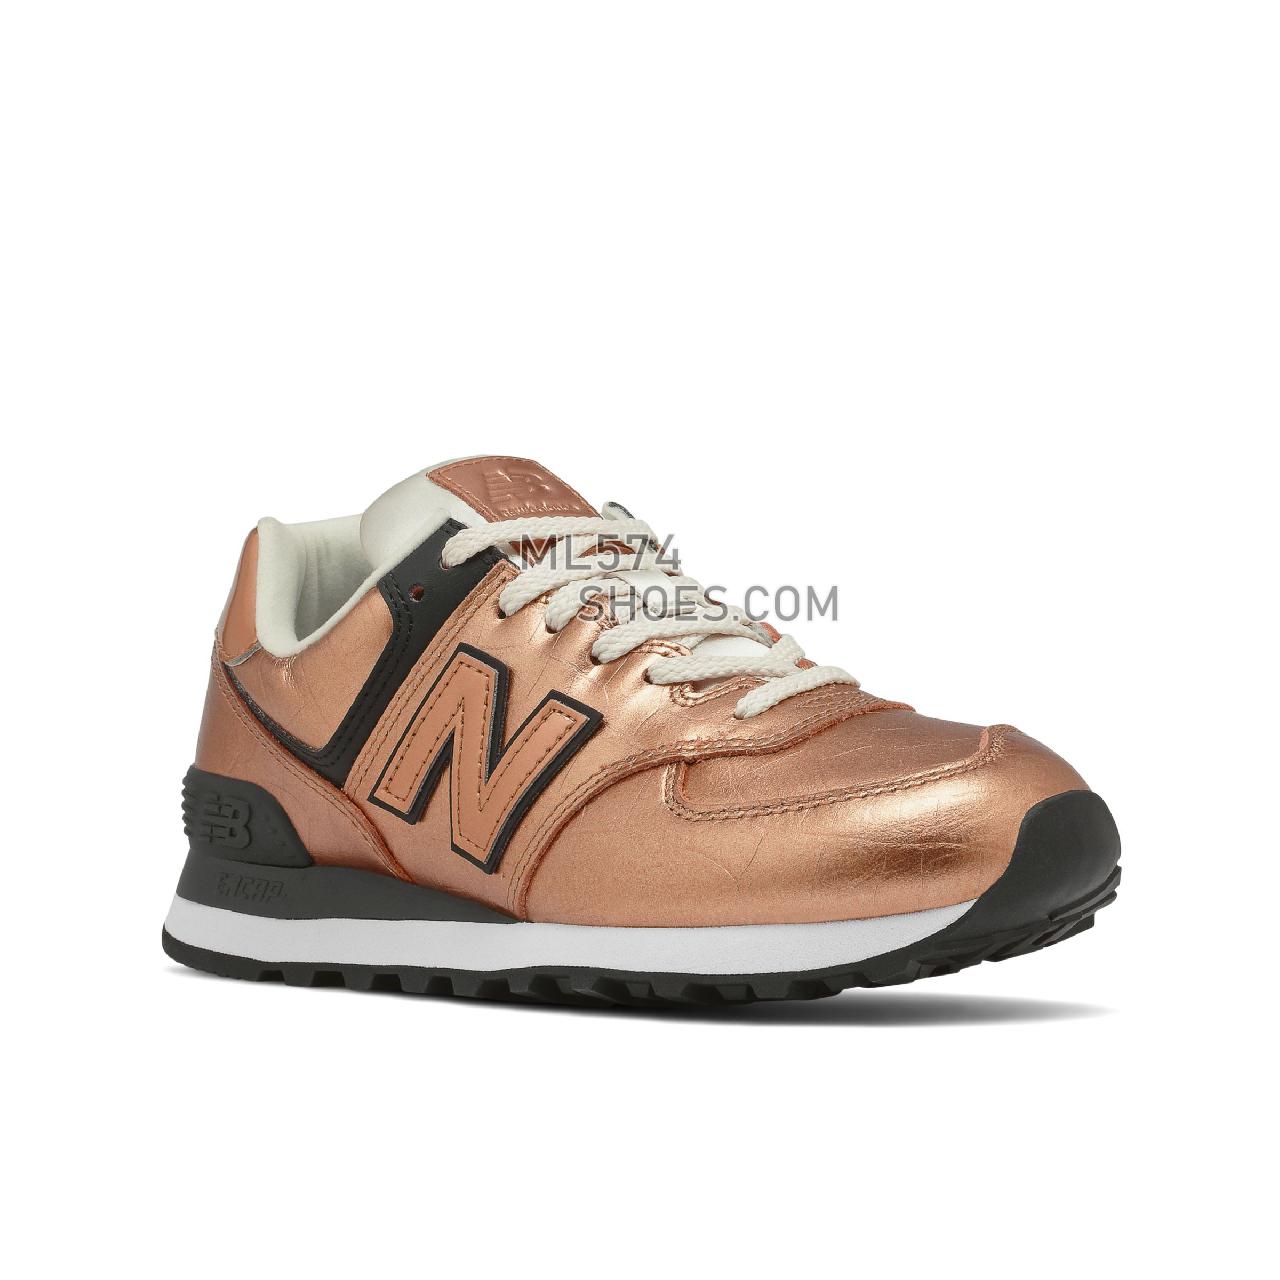 New Balance 574 - Women's Classic Sneakers - Bronze with Black - WL574PX2